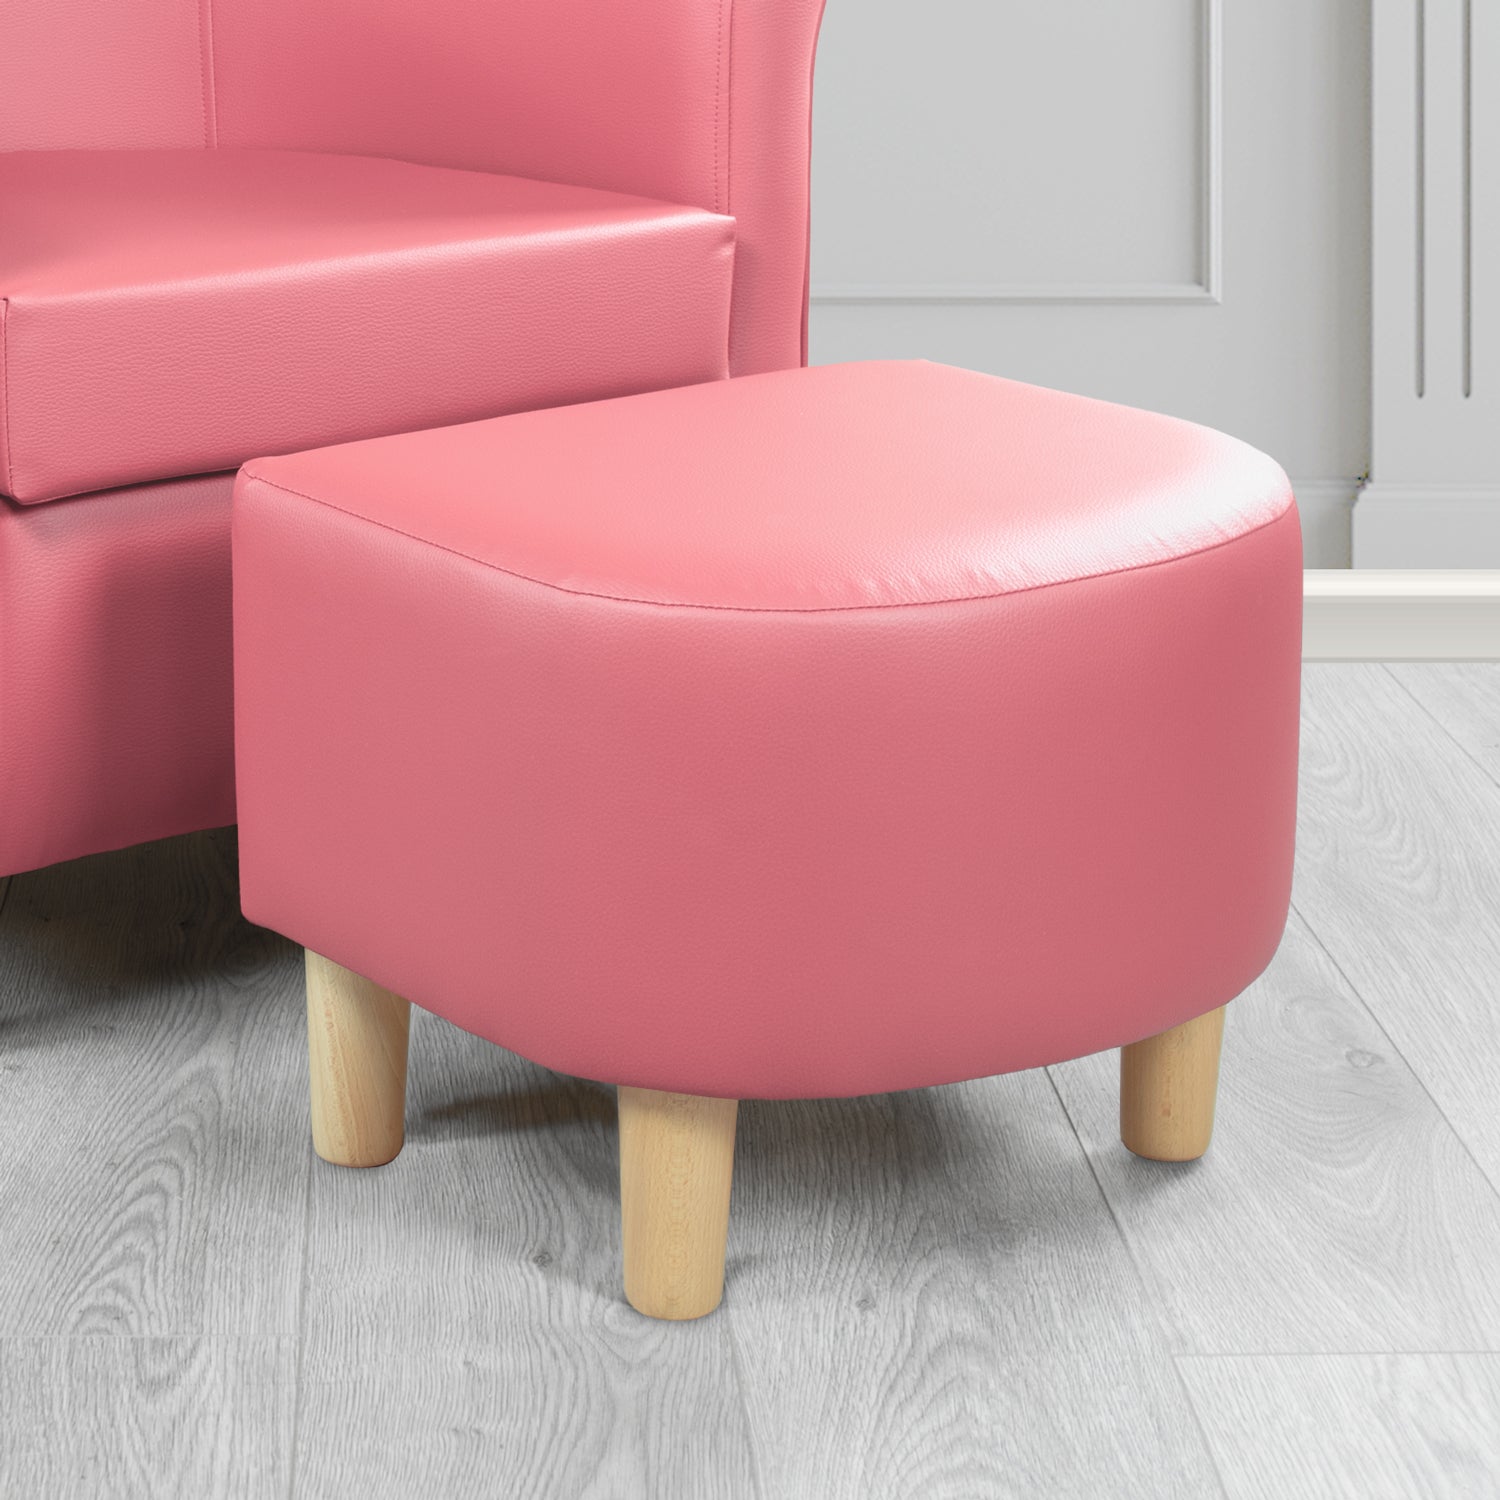 Tuscany Pink Faux Leather Footstool (6541240434730)